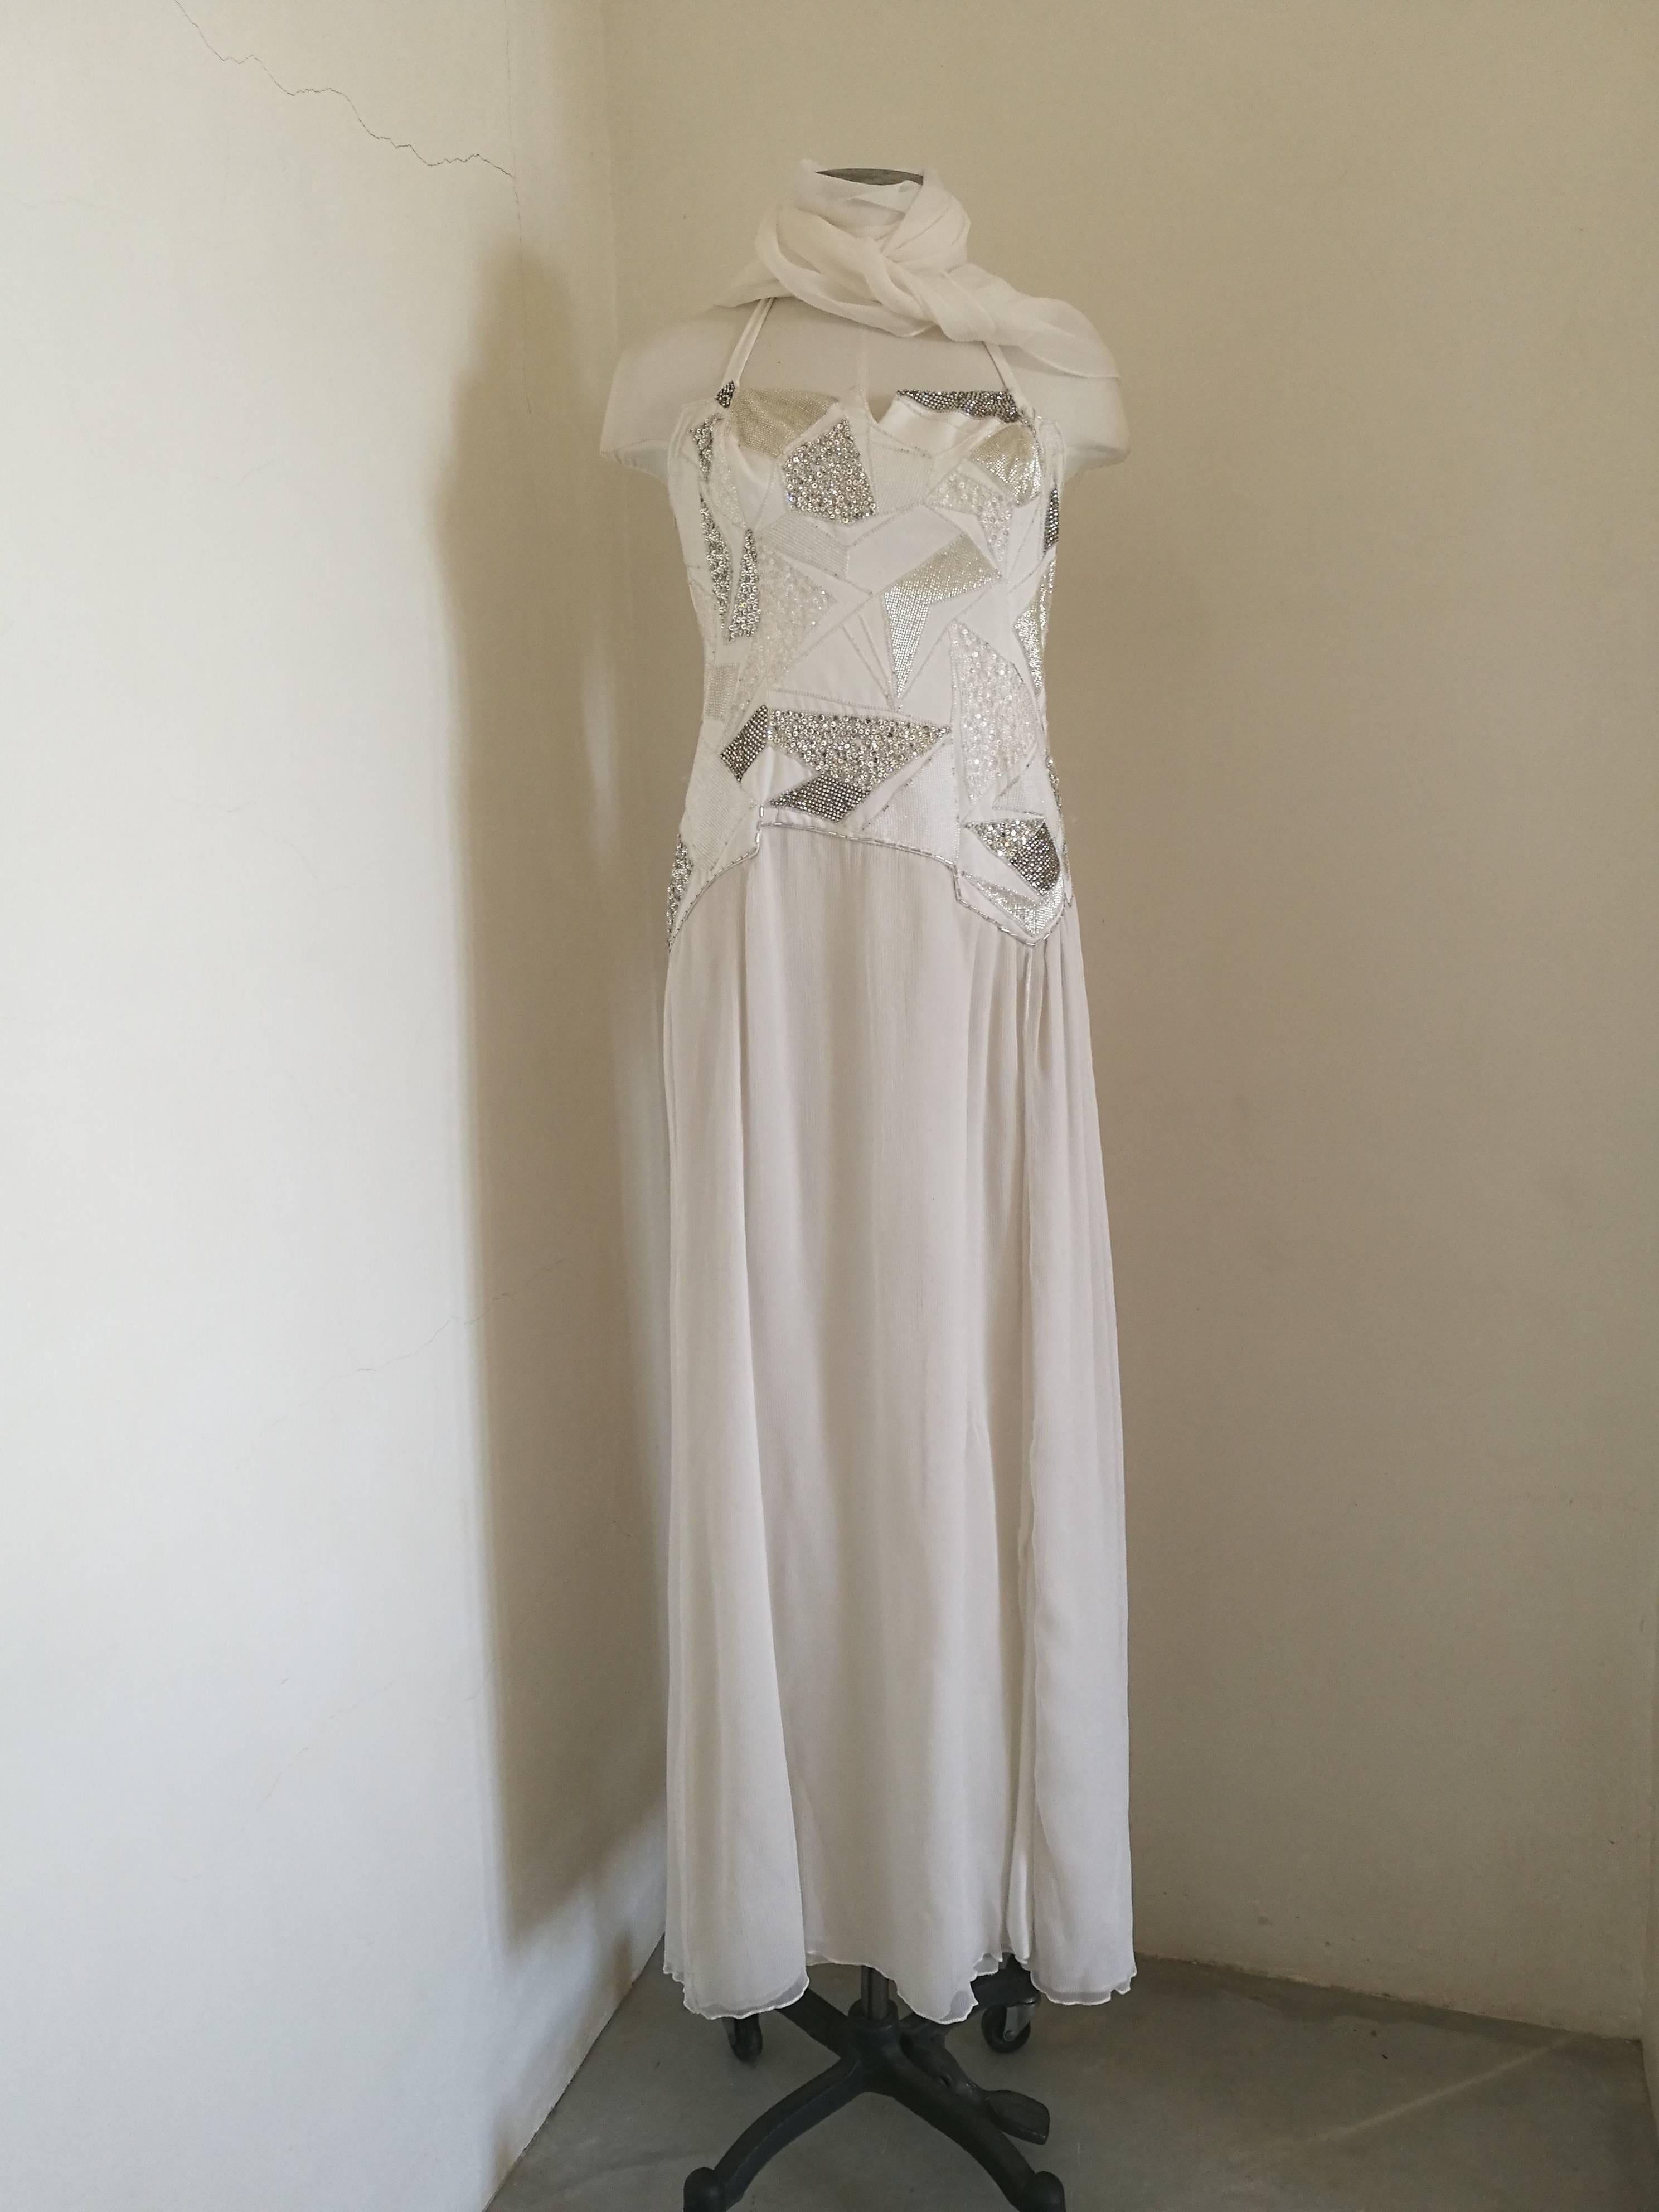 Versace white couture / bridal dress
Embellished with swarovski all over on the front
toally made in italy in italian size range 38